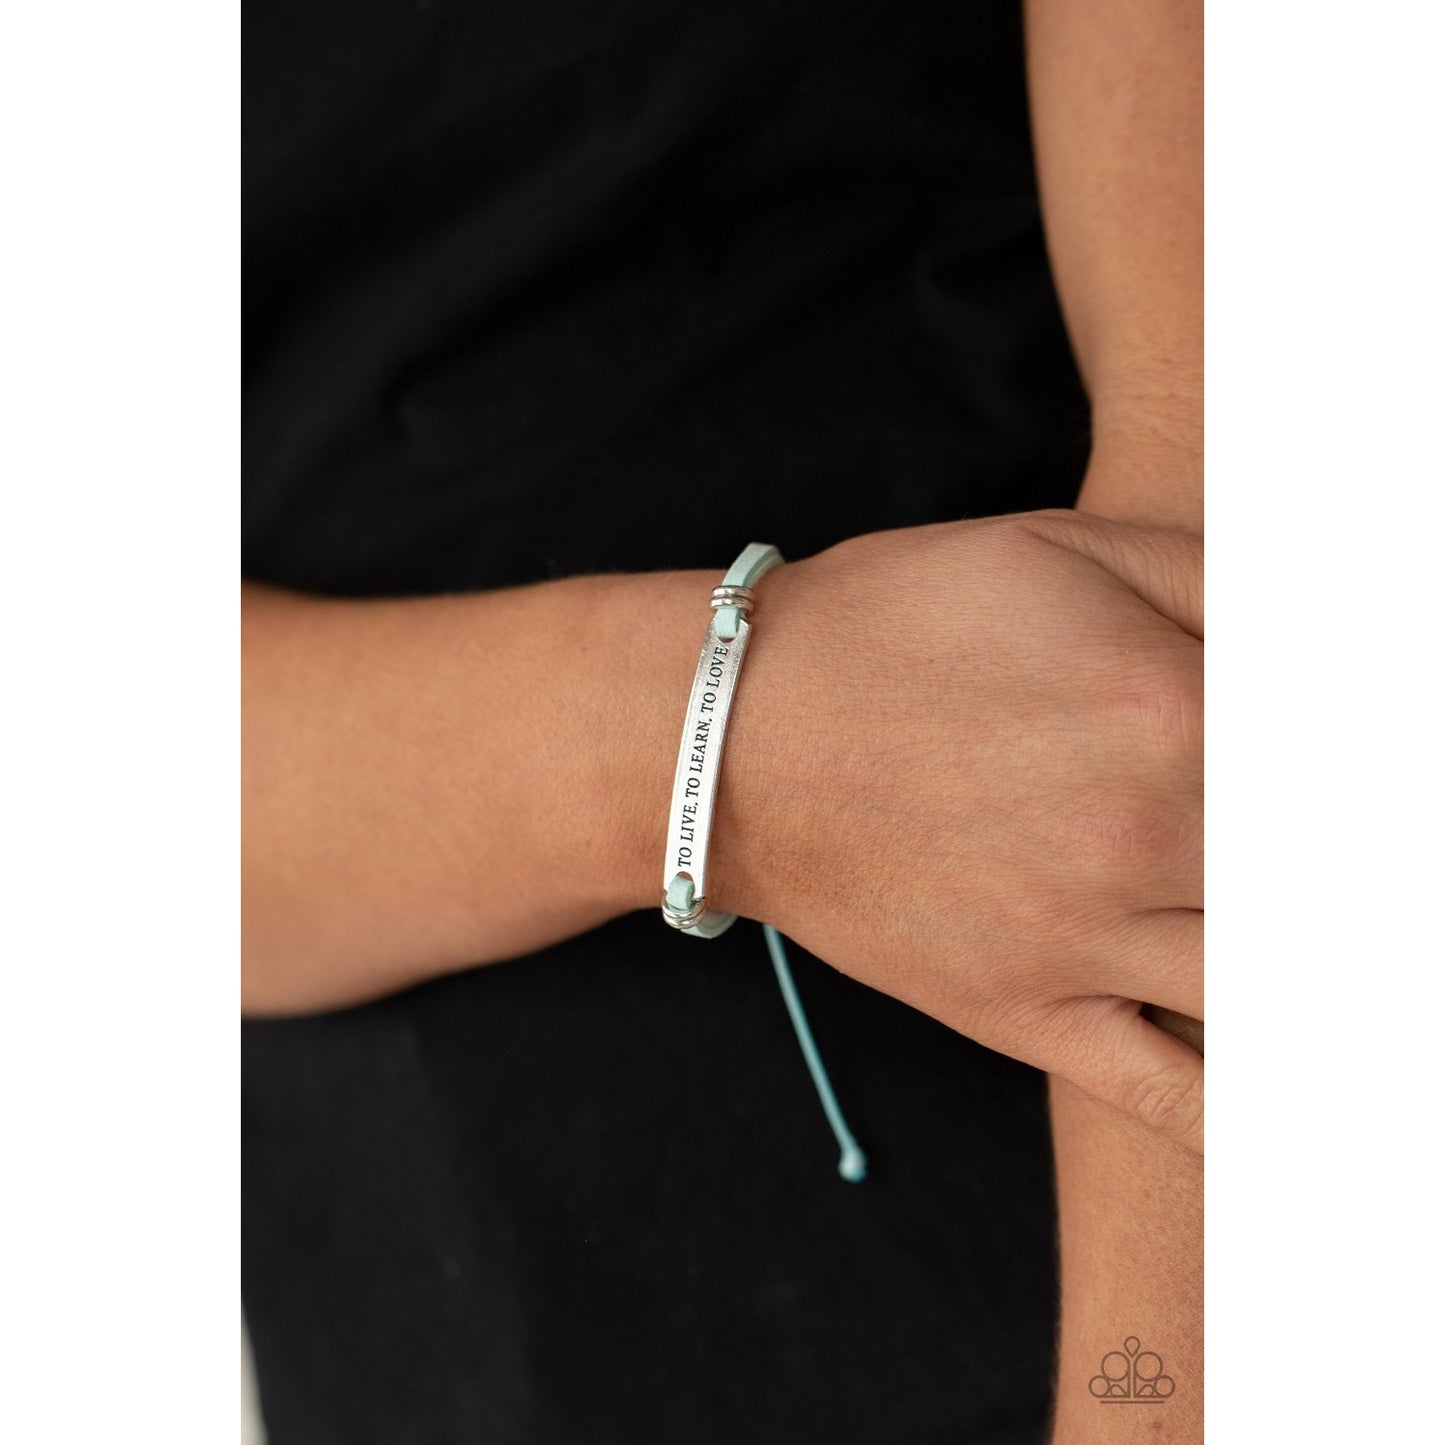 To Live, To Learn, To Love - Blue Bracelet - Paparazzi Accessories - GlaMarous Titi Jewels